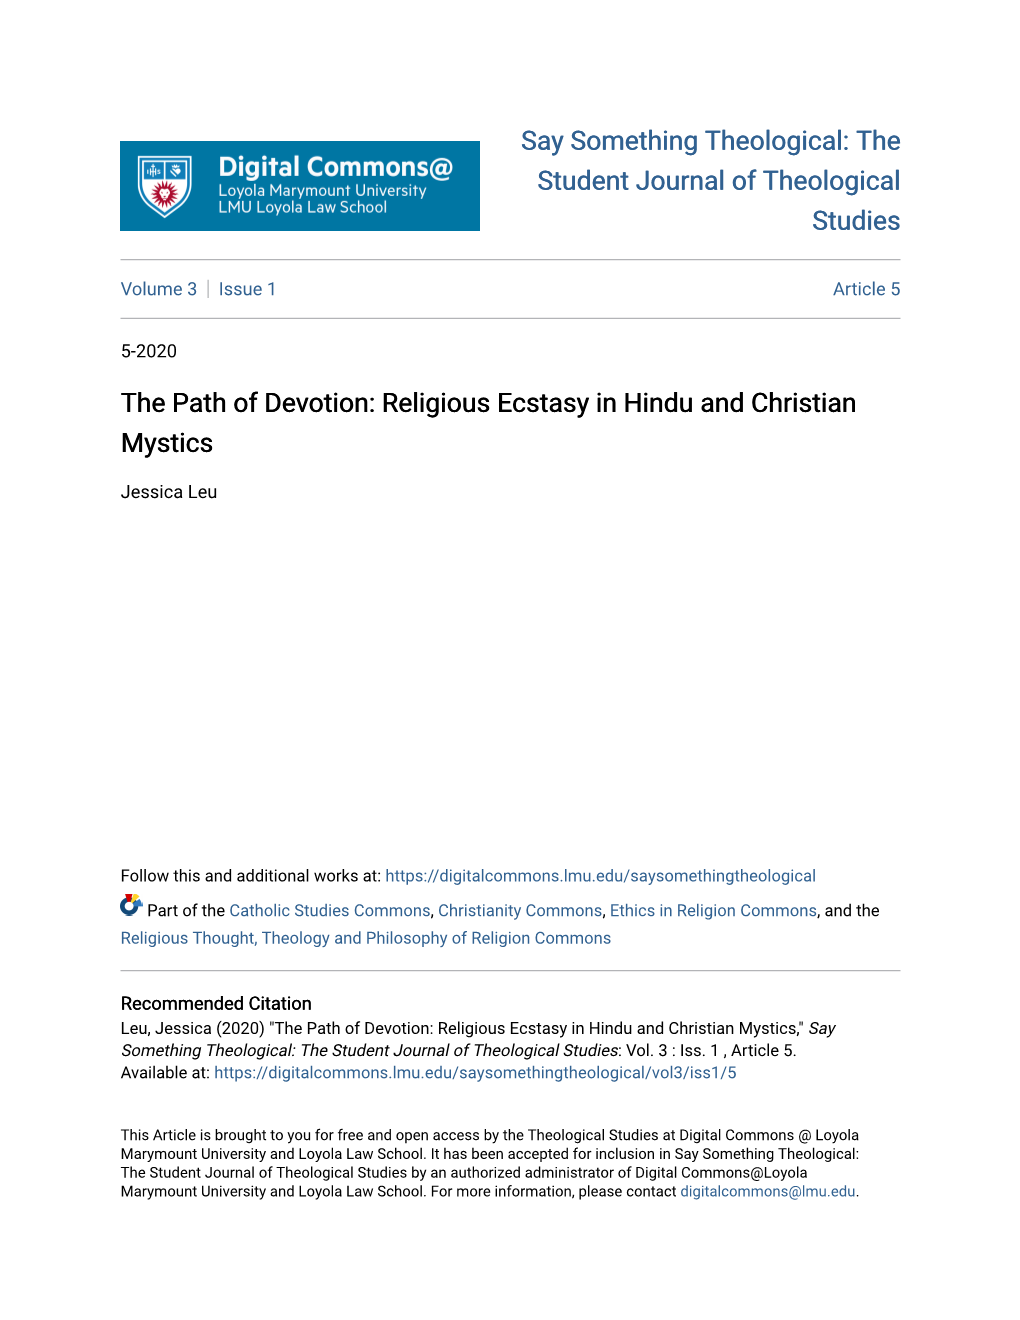 The Path of Devotion: Religious Ecstasy in Hindu and Christian Mystics